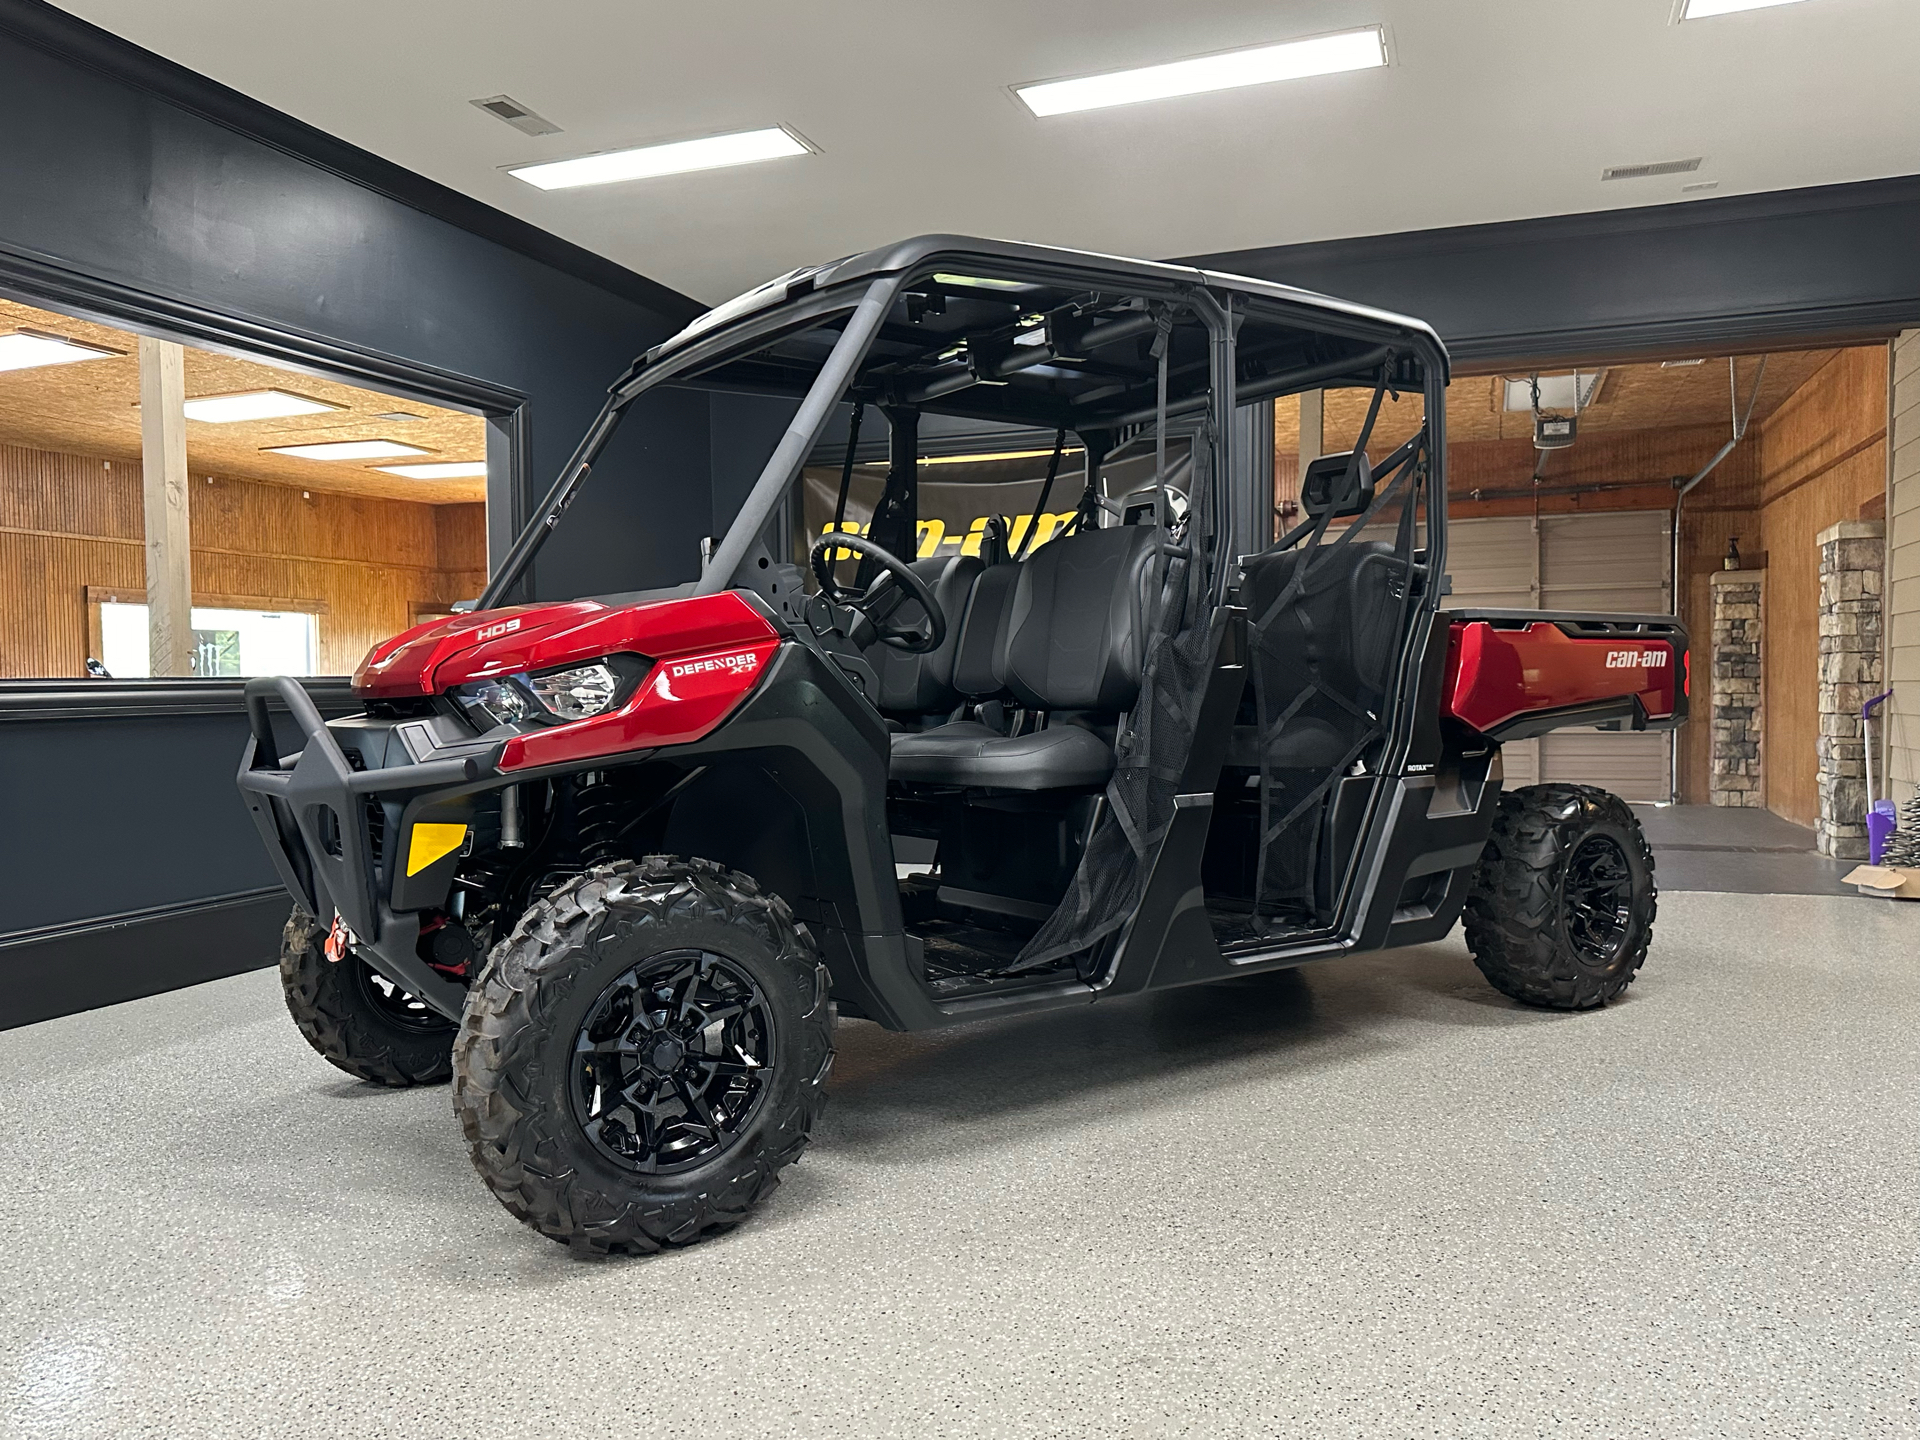 New 2024 Can-am Defender Max Xt Hd9, Iron Station Nc 